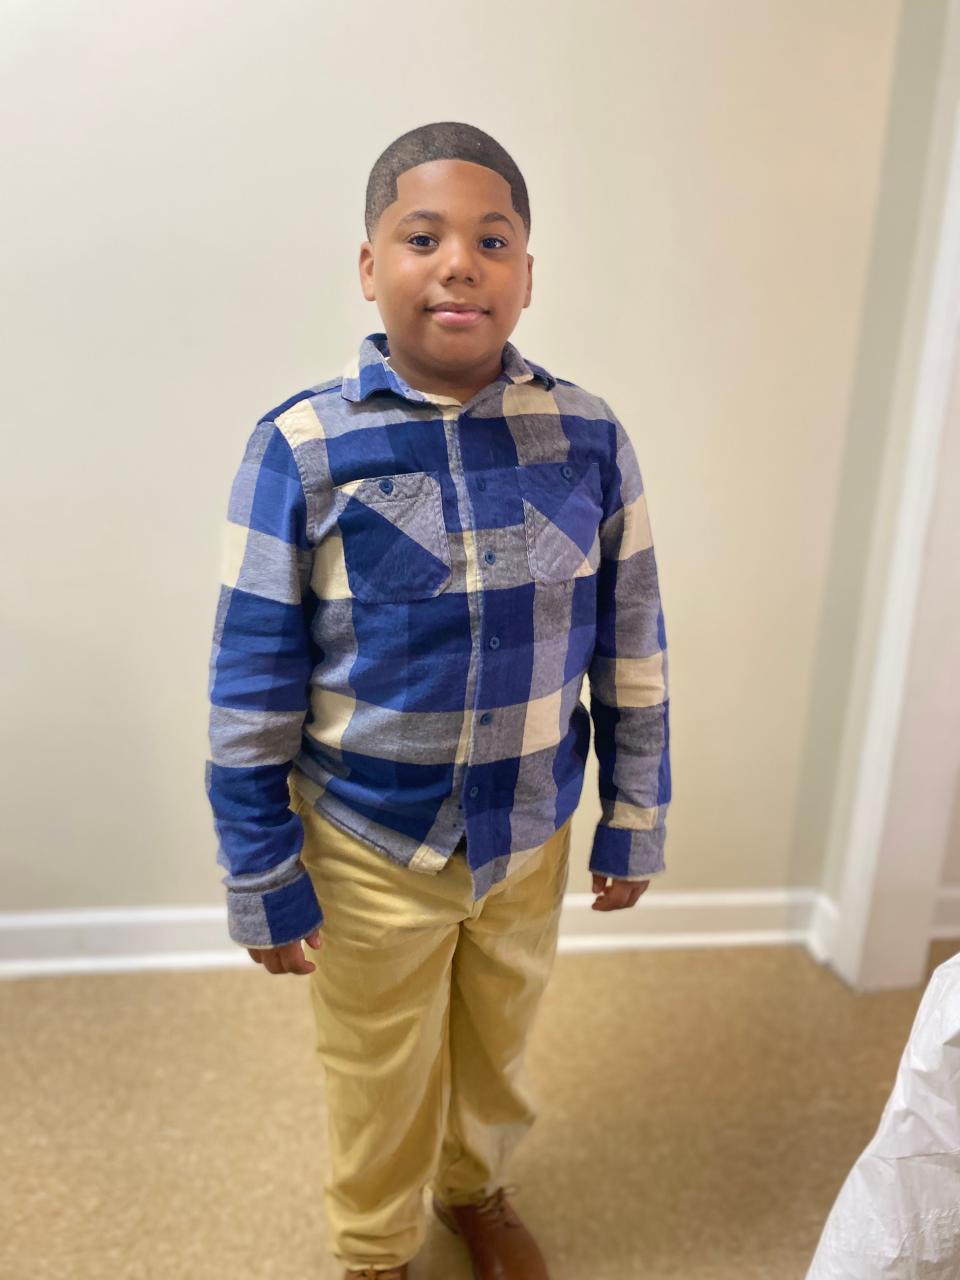 Aderrien Murry, 11, was shot by a responding officer in Indianola, Mississippi after Aderrien had called 911. Aderrien was hospitalized for several days with serious injuries before being released to recover at home.